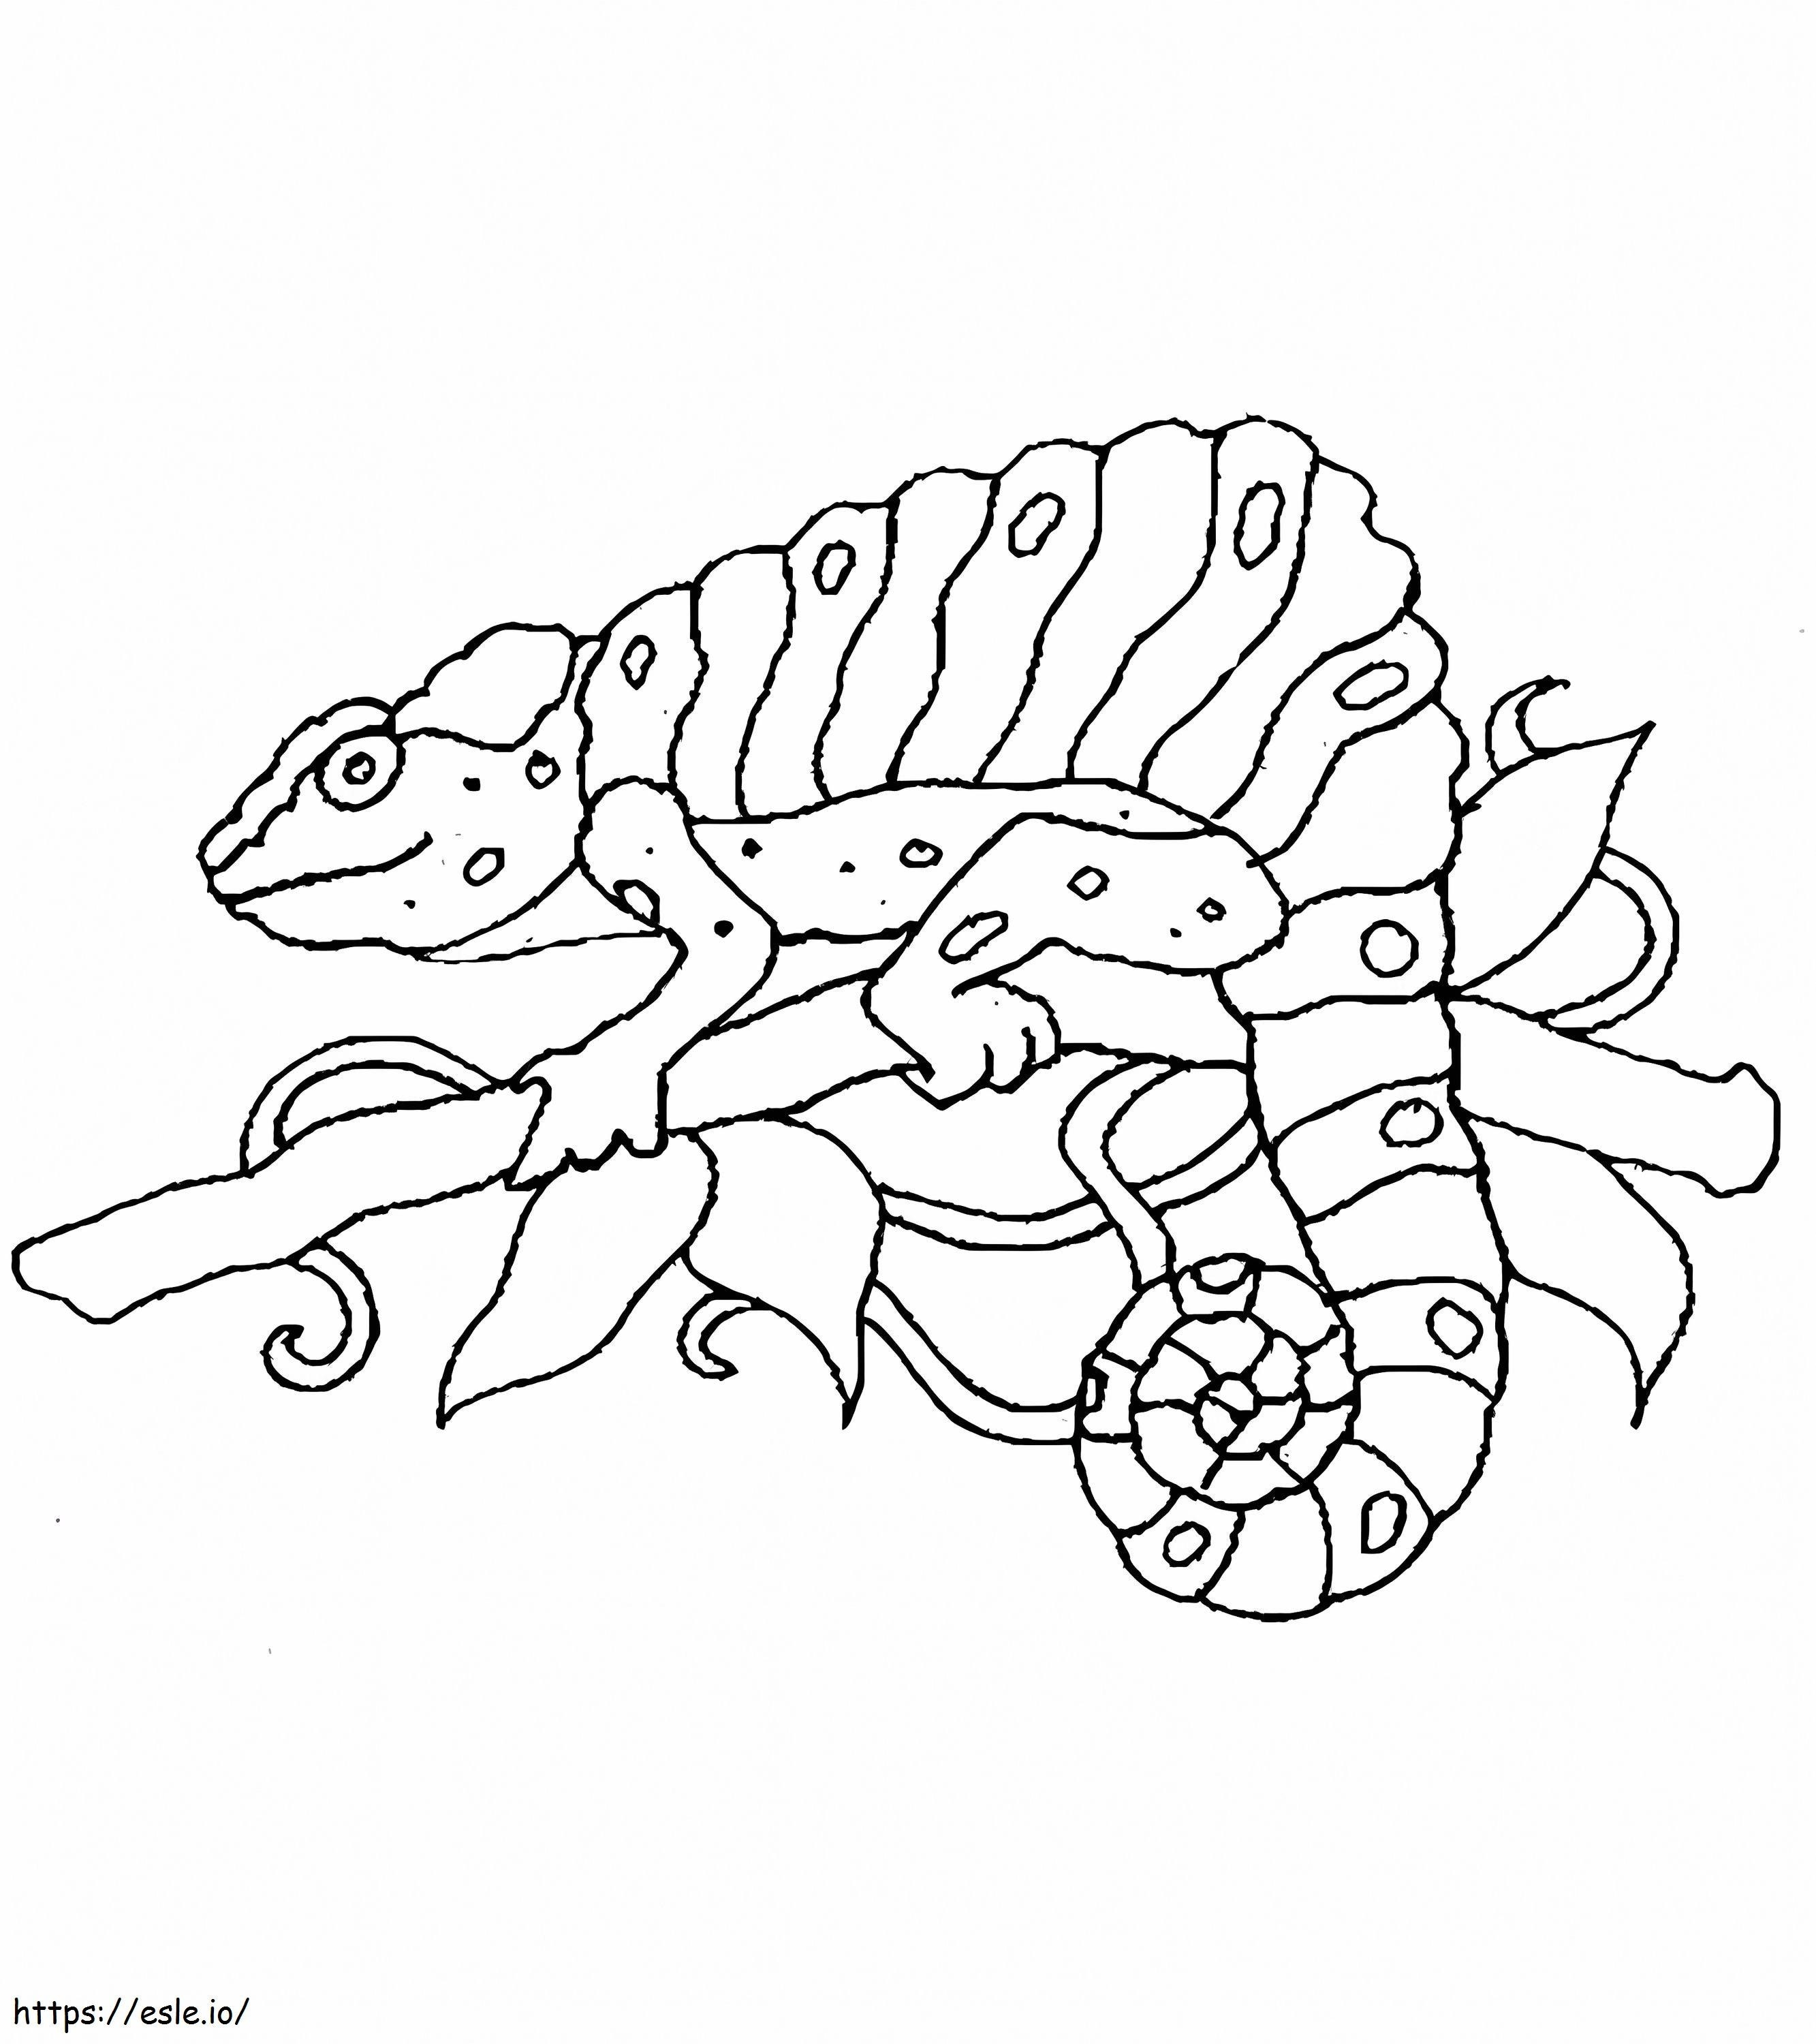 Simple Chameleon coloring page